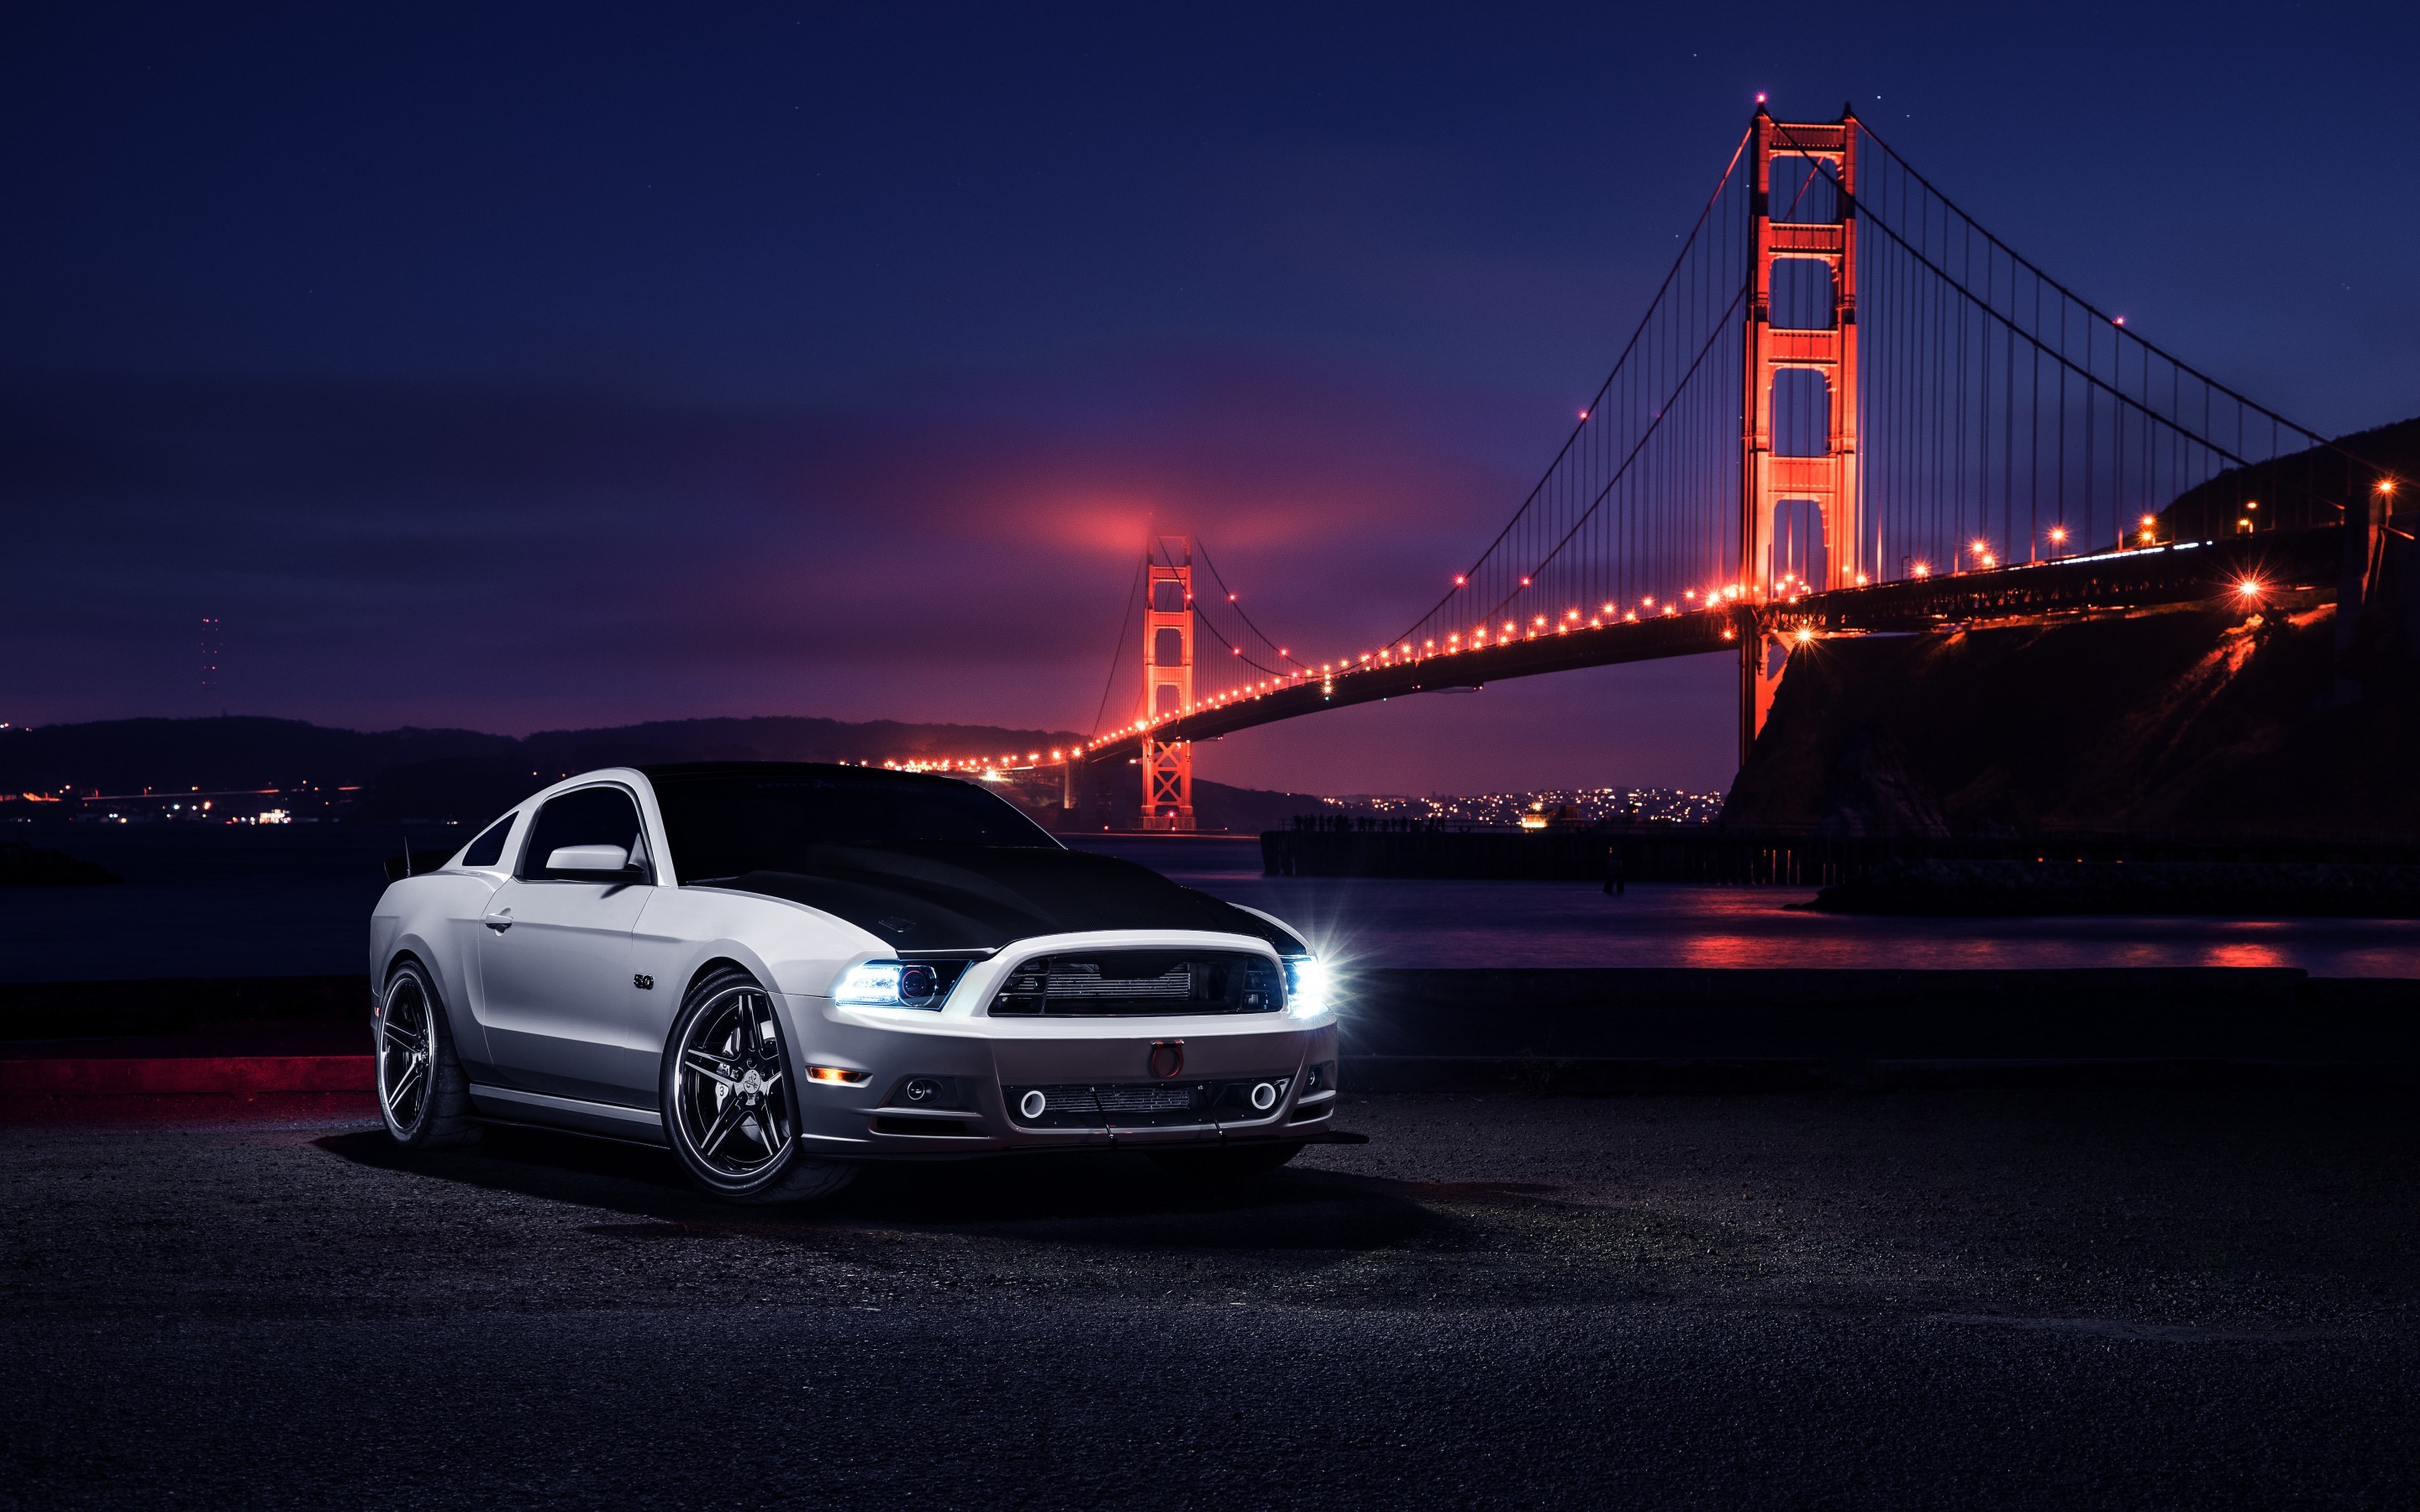 General 2880x1800 Ford Mustang car night Ford Mustang S-197 II Ford vehicle Golden Gate Bridge USA California silver cars muscle cars American cars landmark